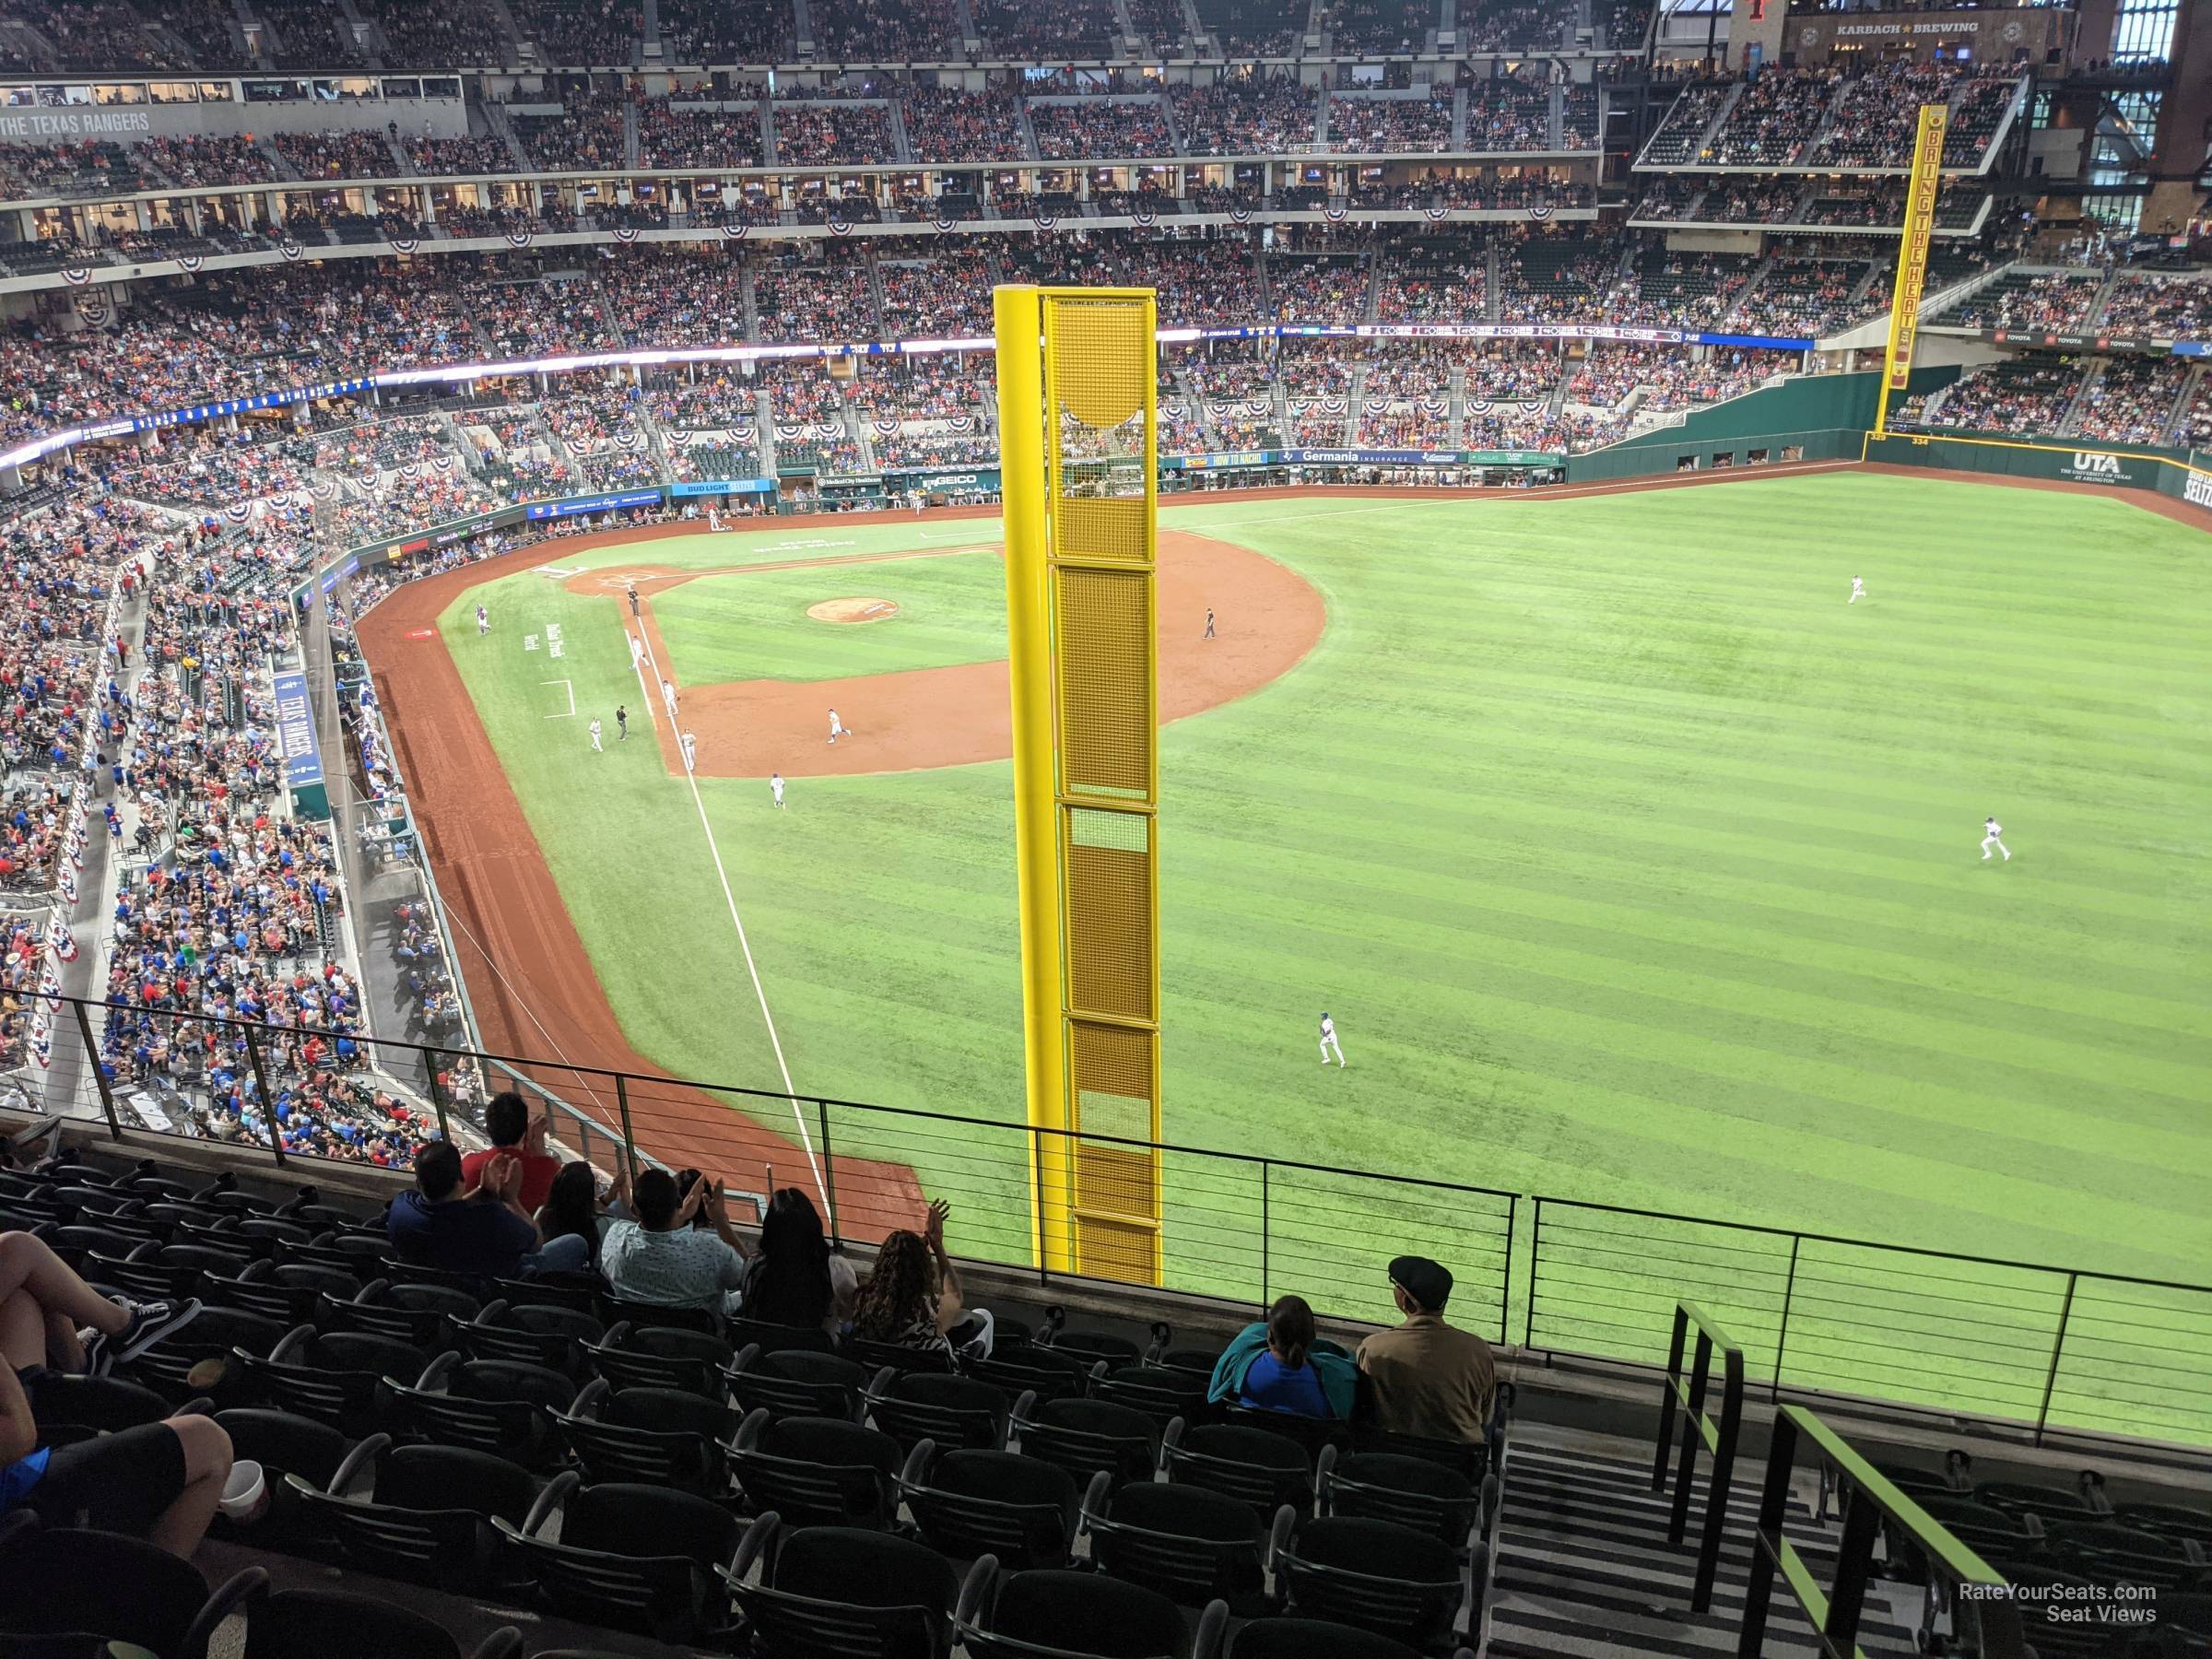 Section 231 at Globe Life Field